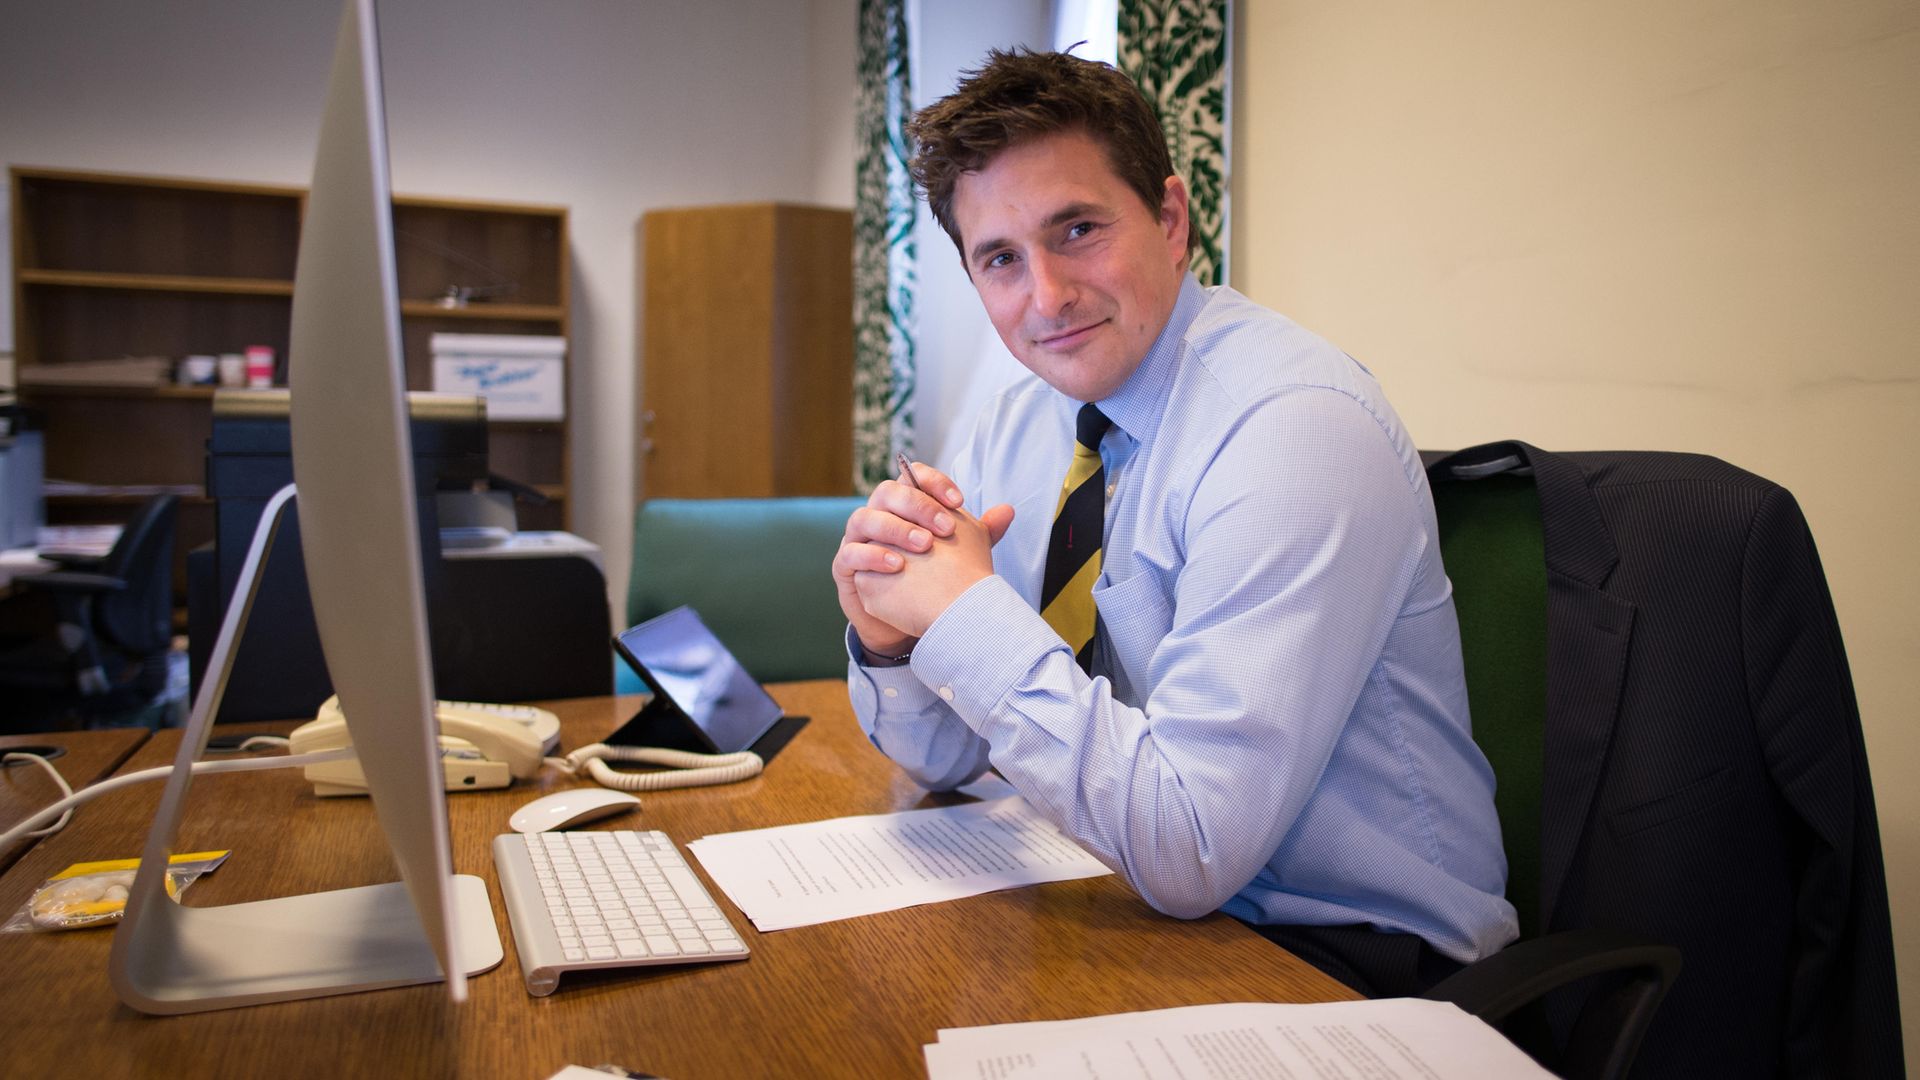 Plymouth MP Johnny Mercer at his office at the Houses of Parliament in London - Credit: PA